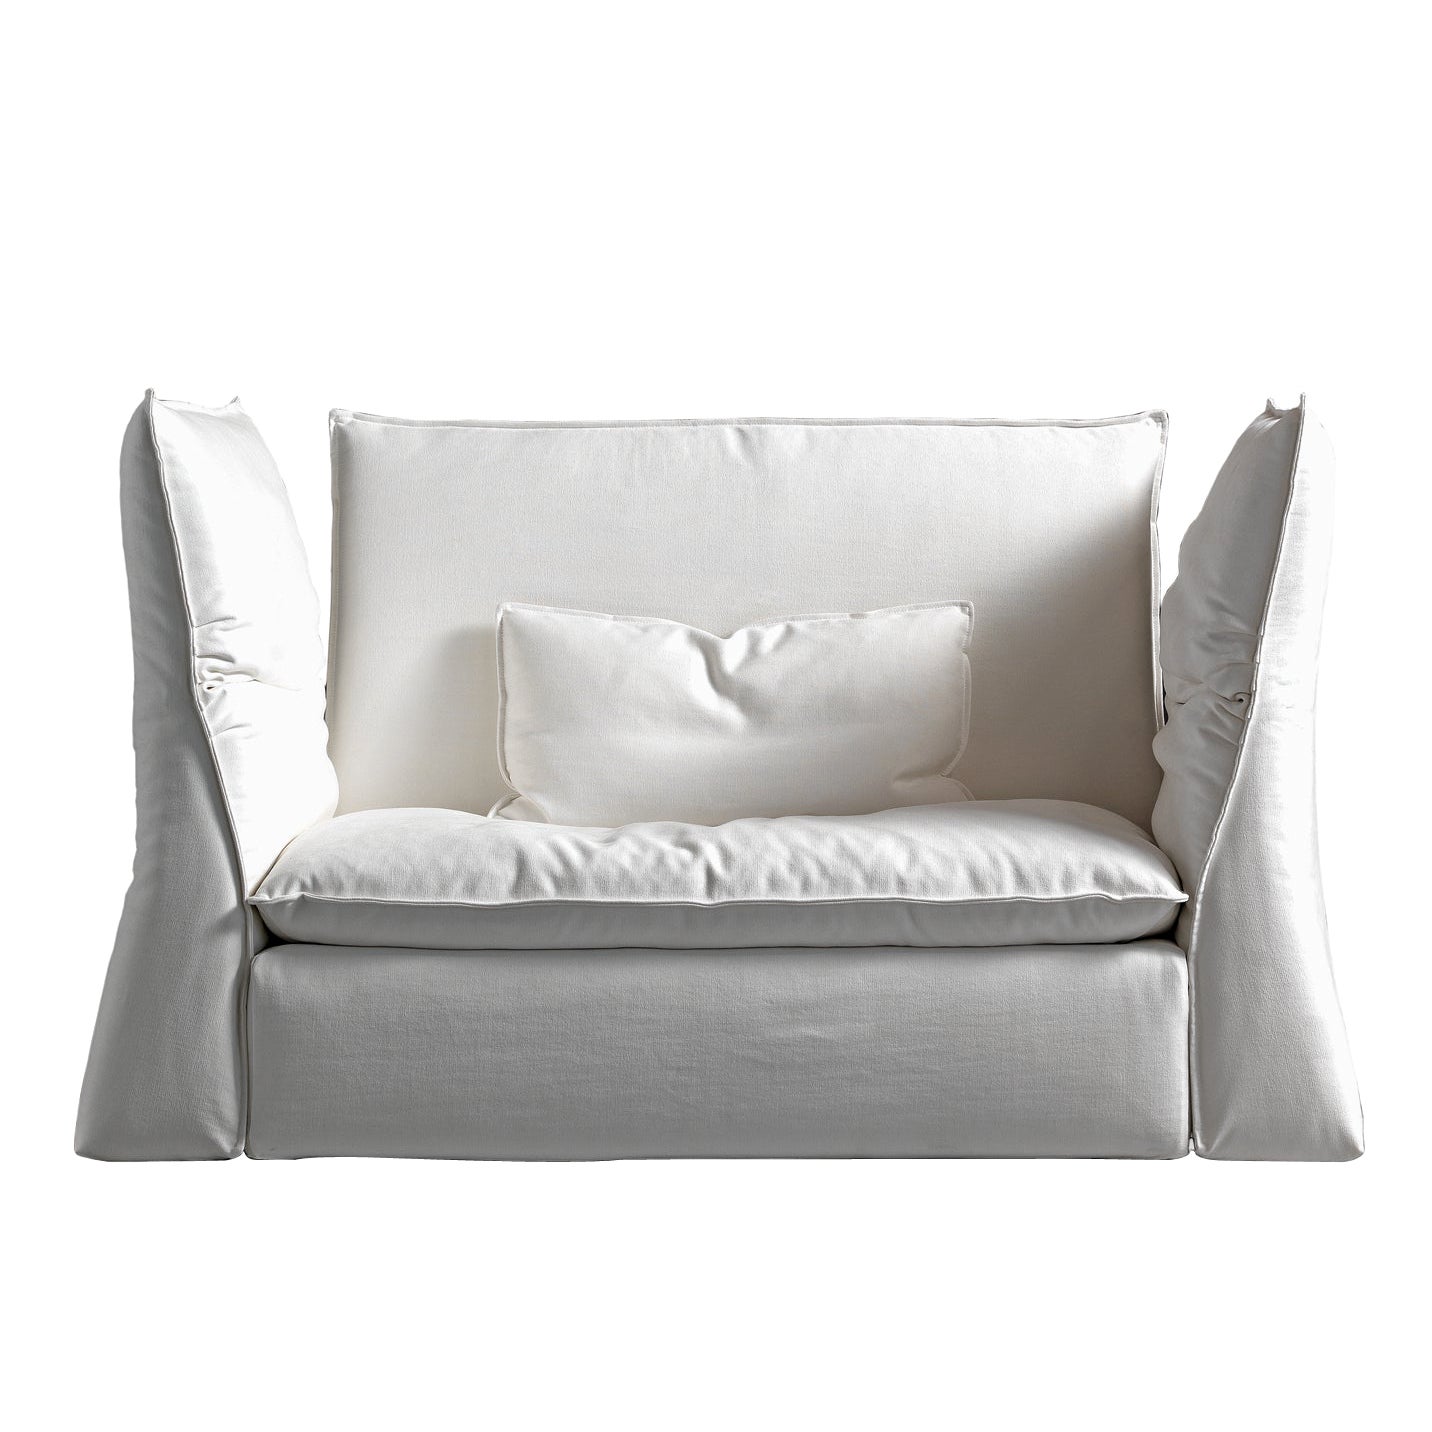 Les Femmes Medium Armchair in Byblos White Upholstery by Giuseppe Viganò For Sale